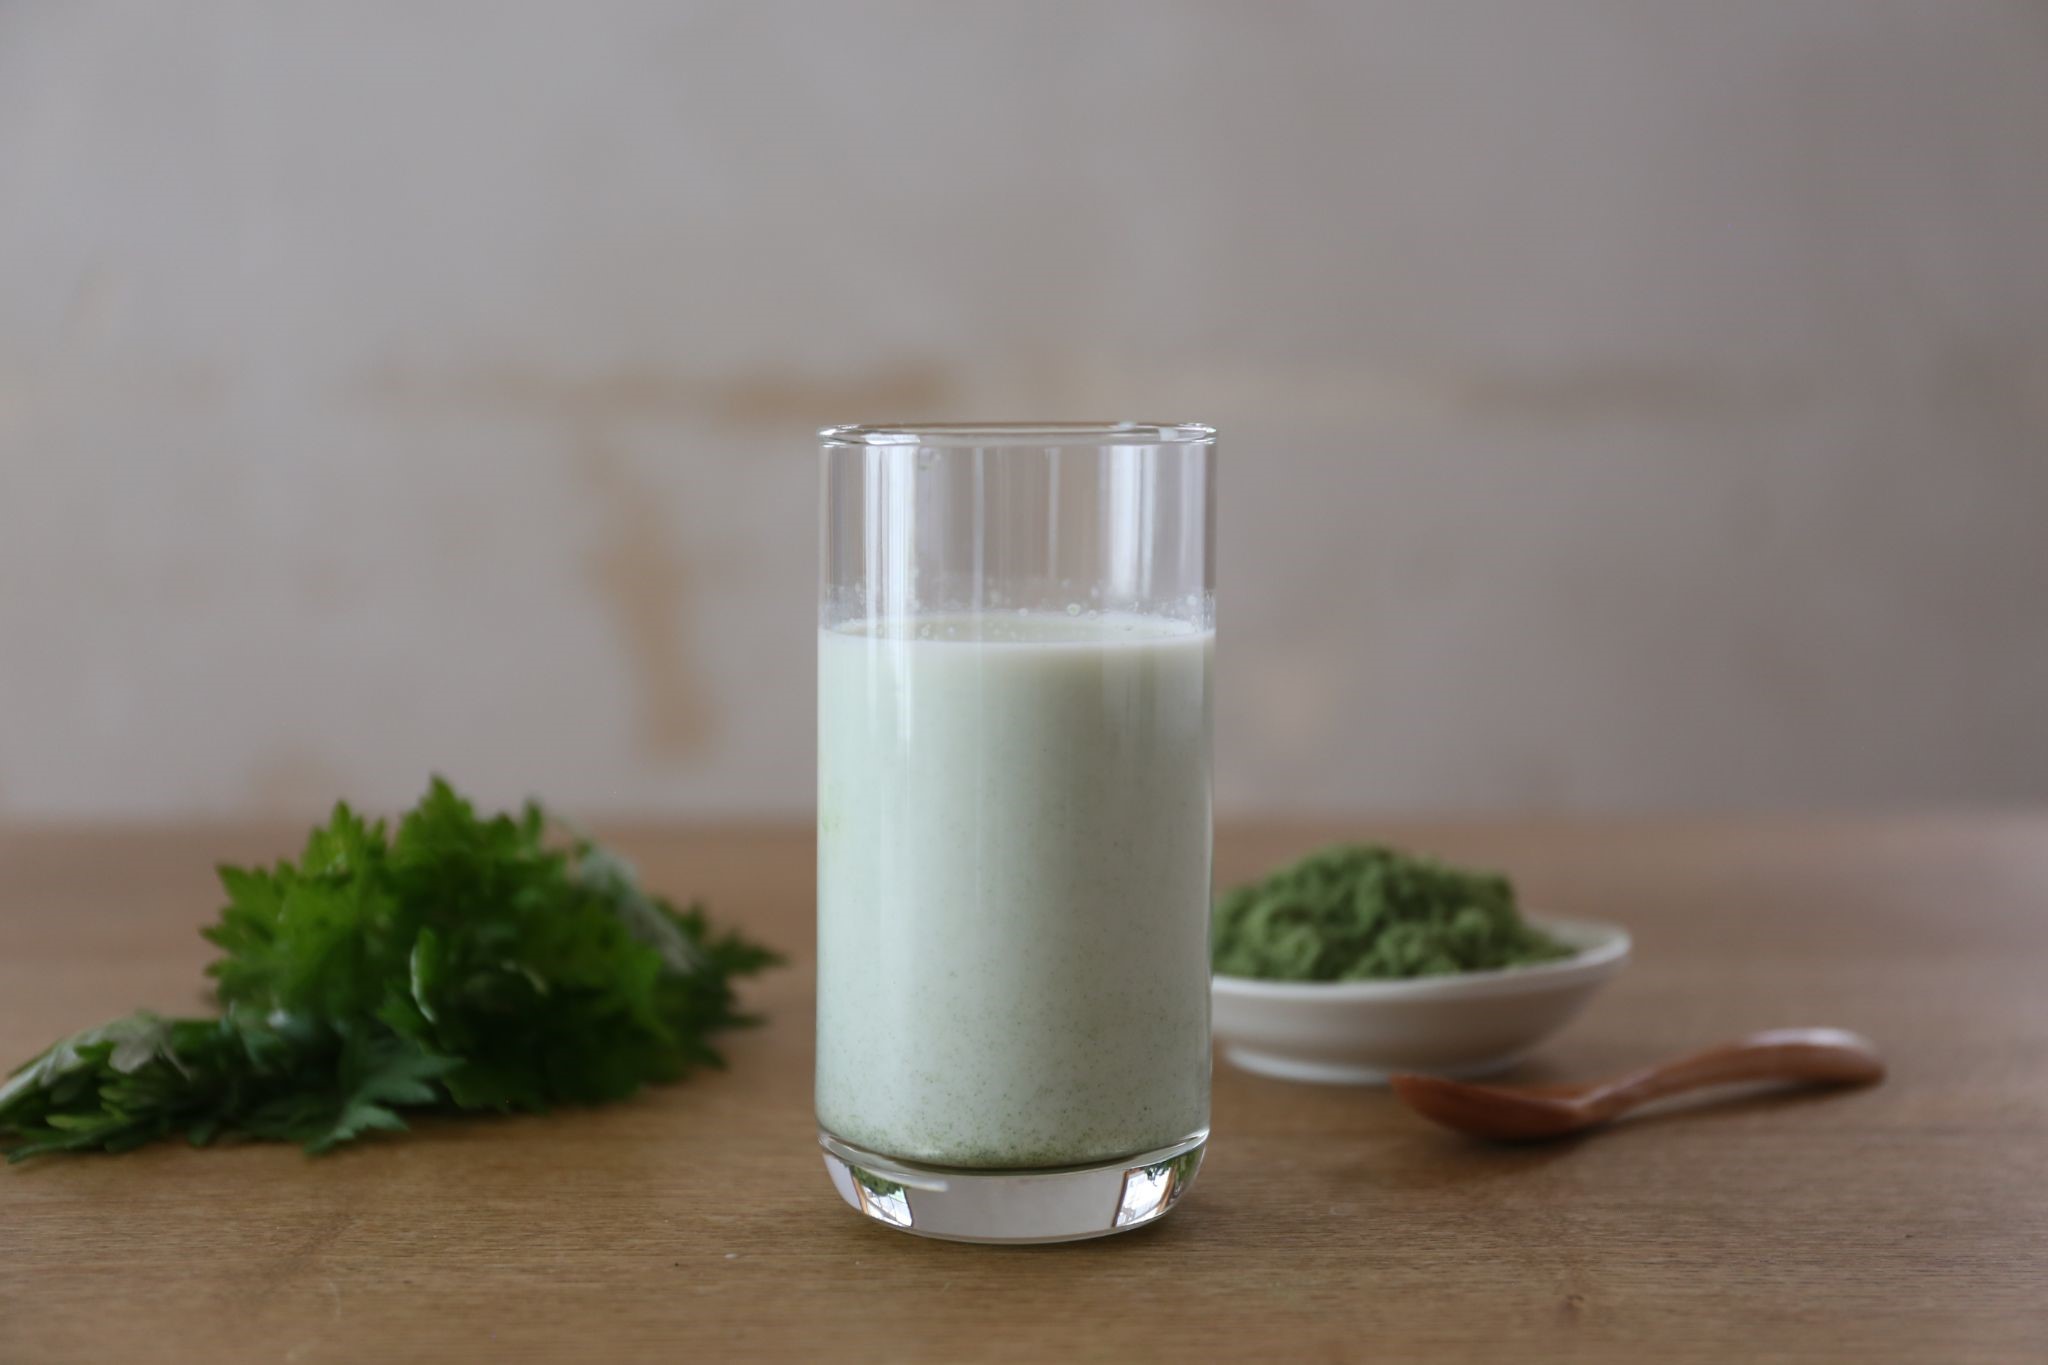 mugwort powder diluted with milk